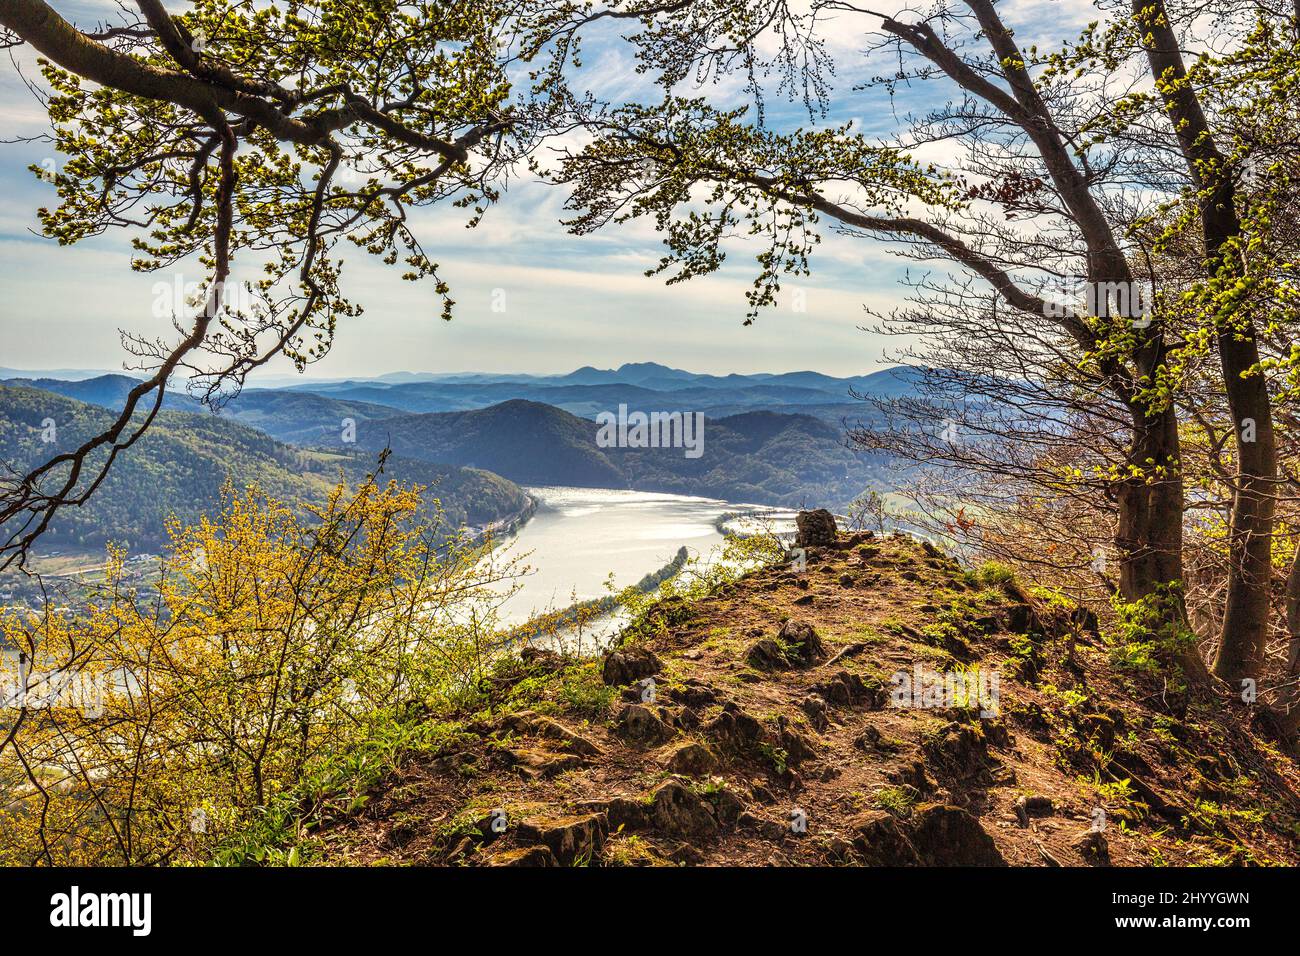 View of the Nosice dam on the Vah river from the Klapy hill near Povazska Bystrica town in northwestern Slovakia, Europe. Stock Photo